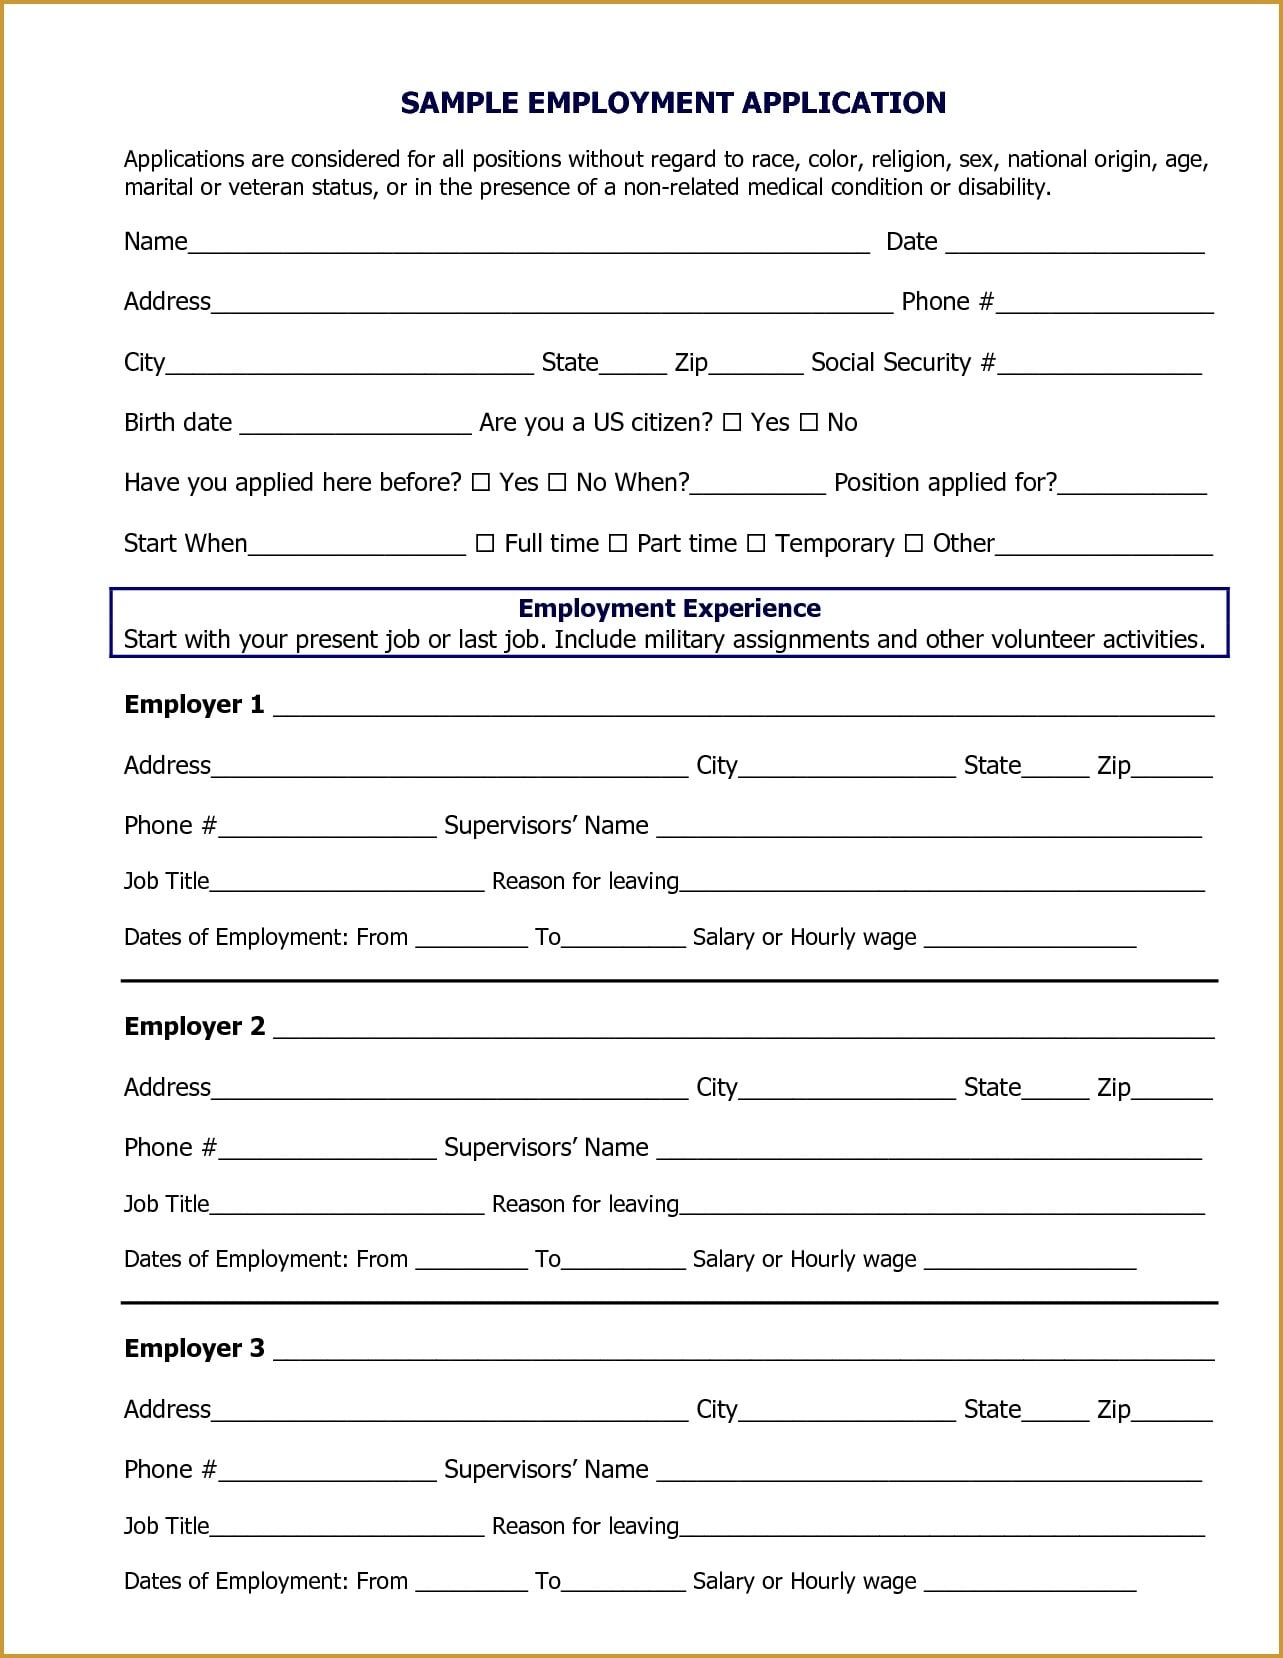 employment application for review example